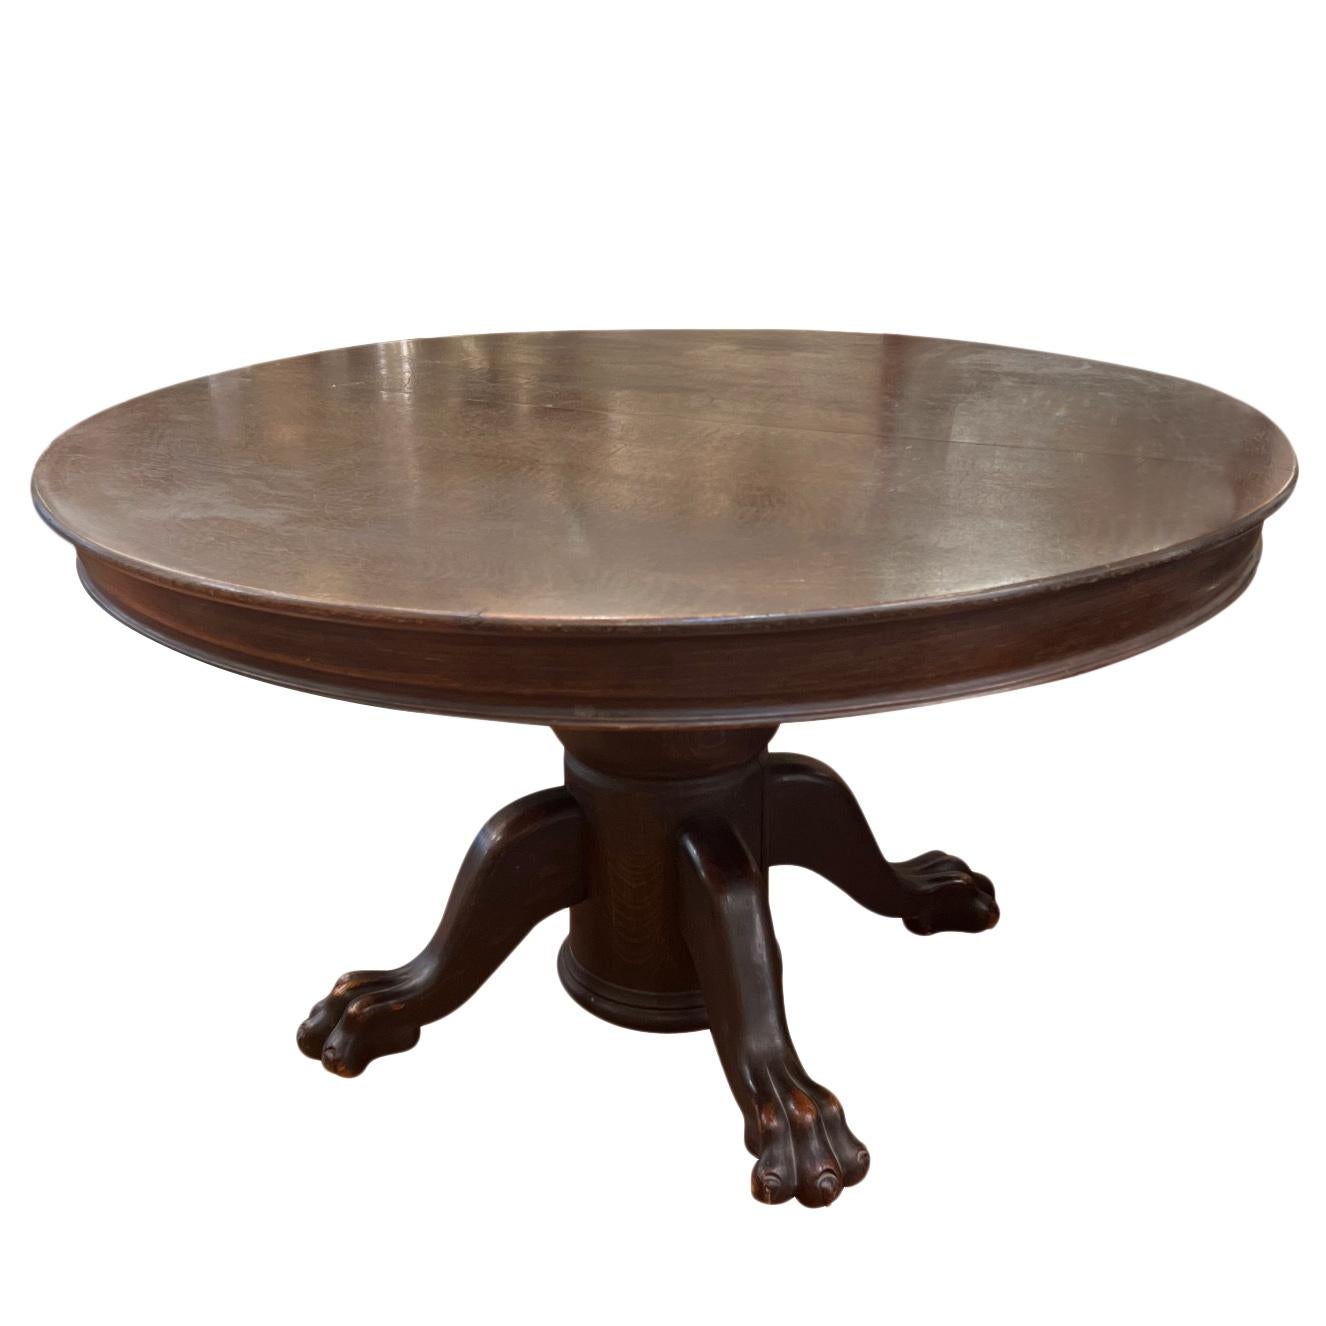 Late 19th century American carved oak dining table with extensions leaves and with lion's paws feet.

Measurements:
Height 30